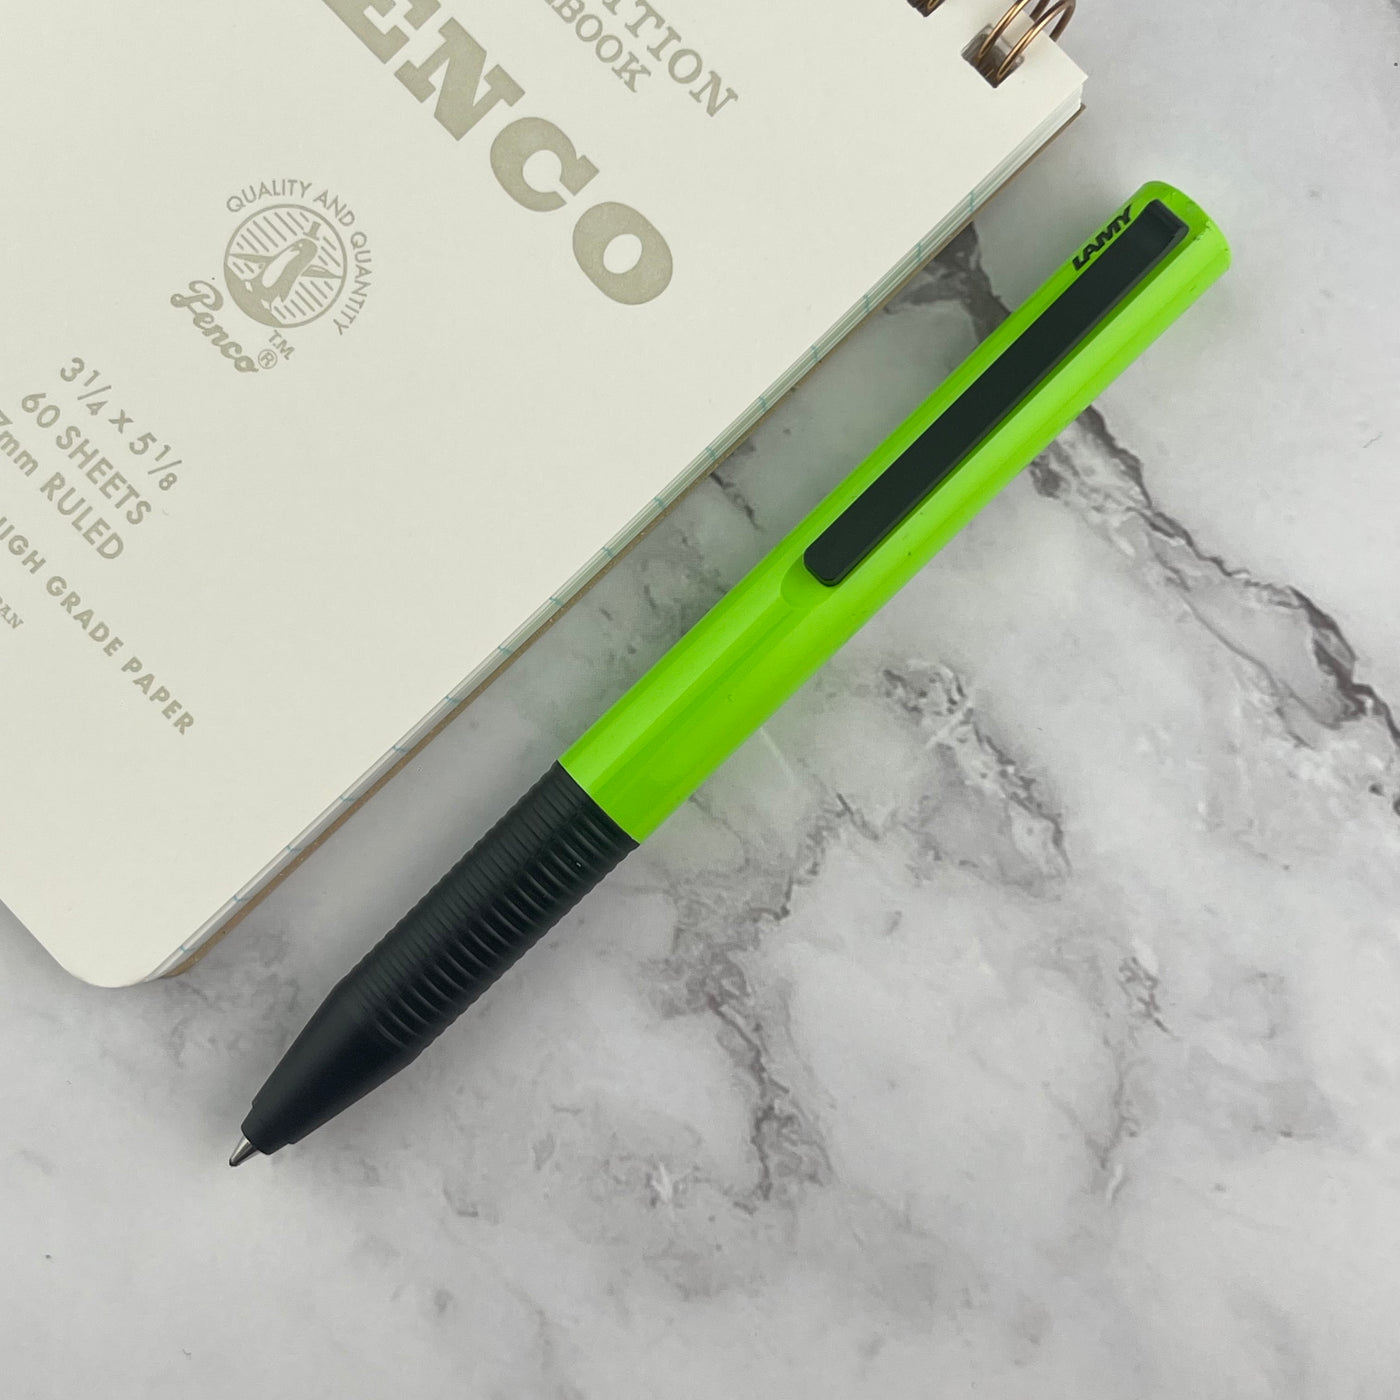 Lamy Tipo Rollerball Pen - Lime